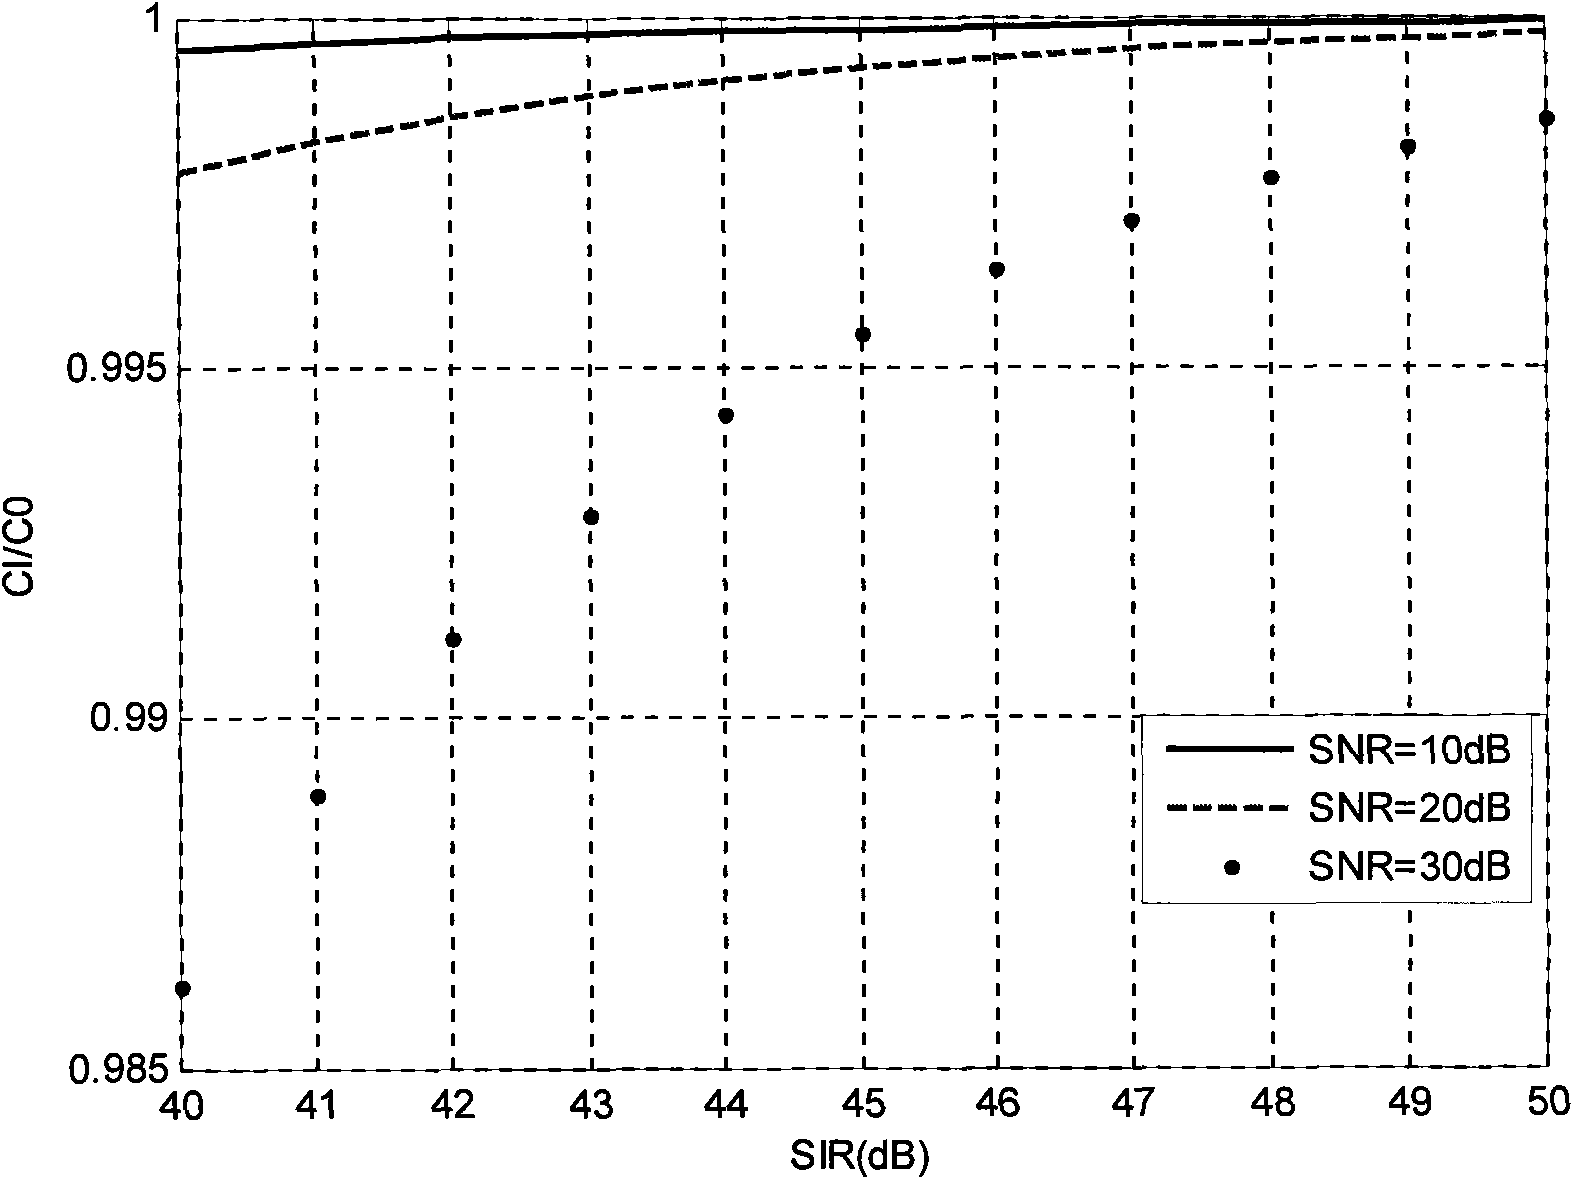 Signal-to-interference ratio decision method in actual ICI (Inter-Carrier Interference) elimination of high-mobility OFDM (Orthogonal Frequency Division Multiplexing) cooperative system